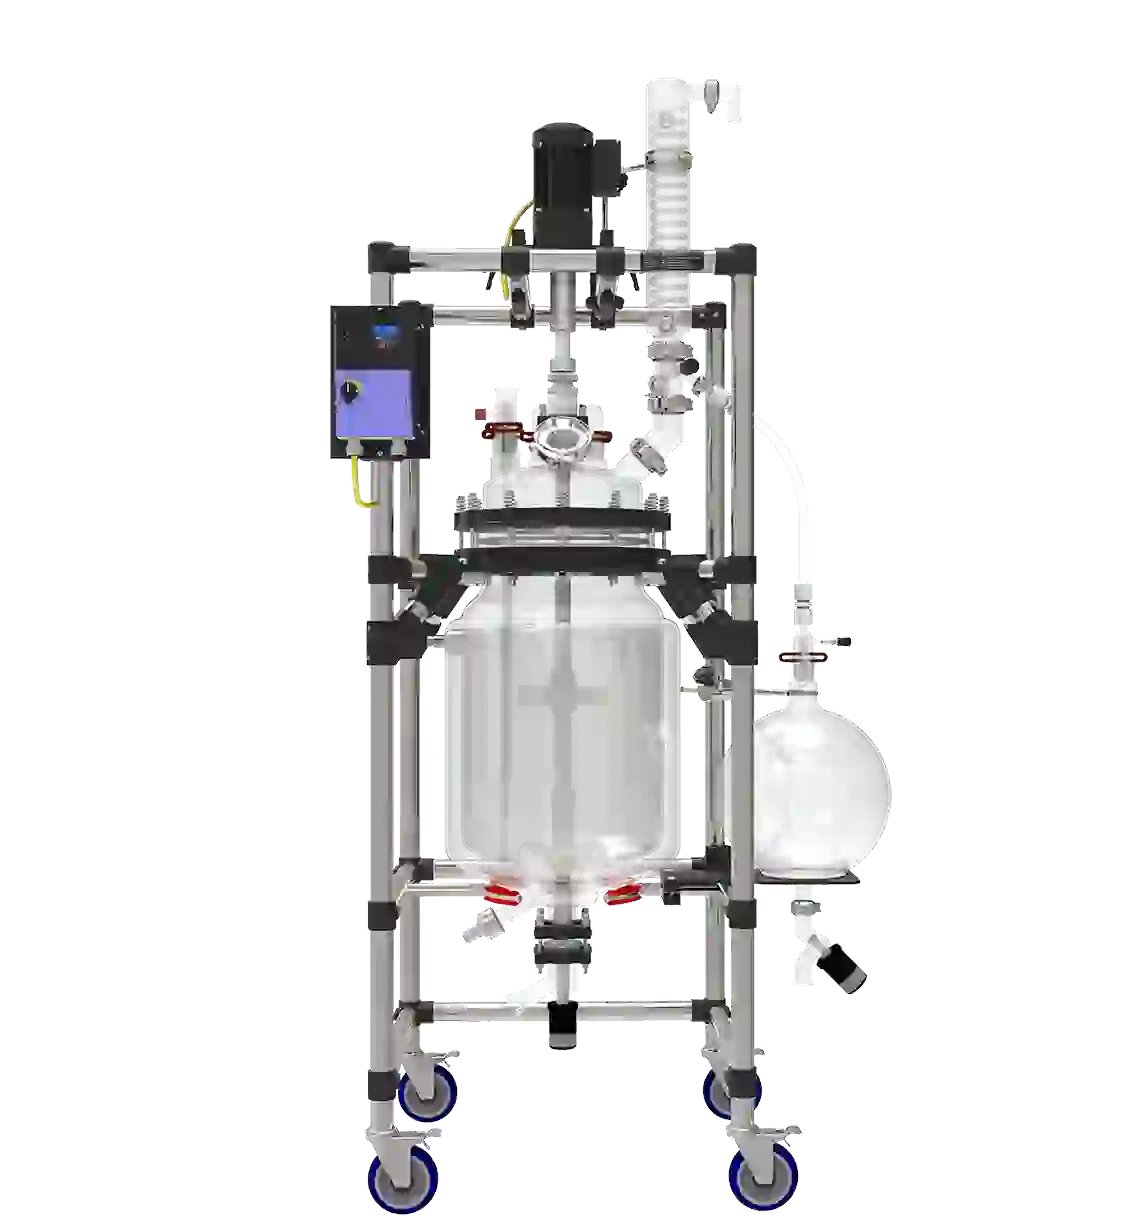 A detailed custom reactors systems with glass and stainless steel components for specialized industrial and pharmaceutical use